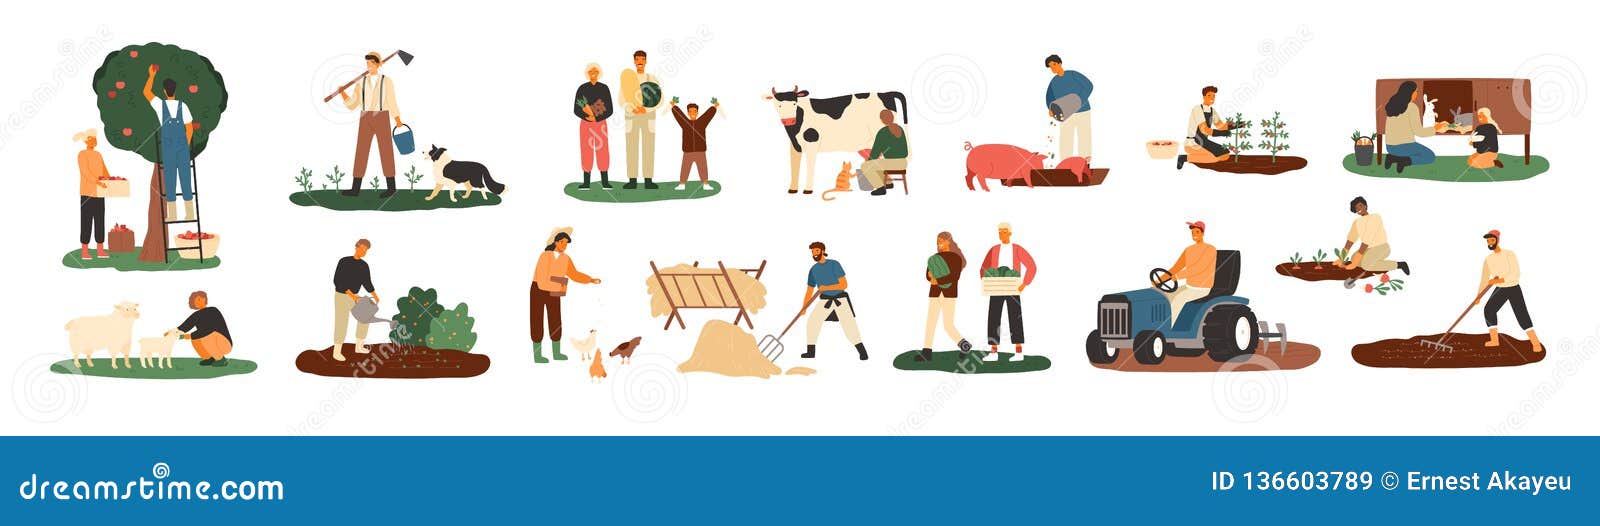 set of farmers or agricultural workers planting crops, gathering harvest, collecting apples, feeding farm animals